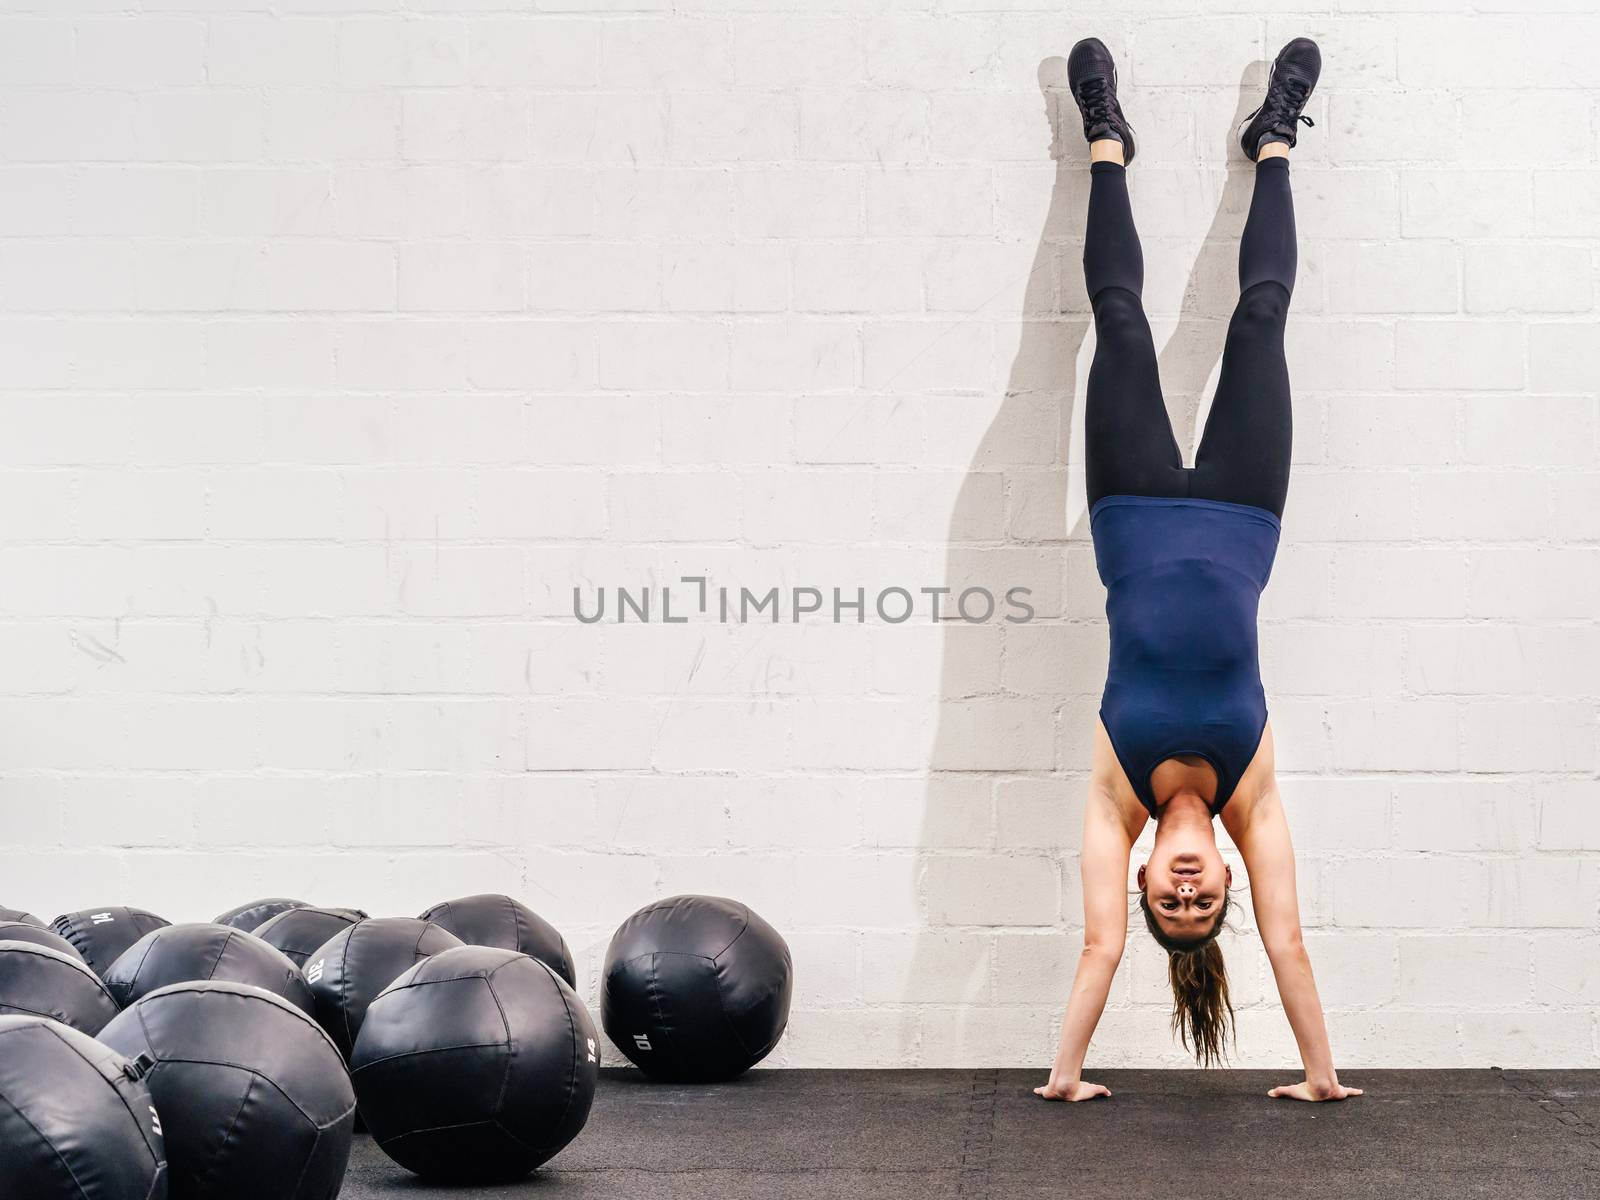 Handstand at the crossfit gym by sumners